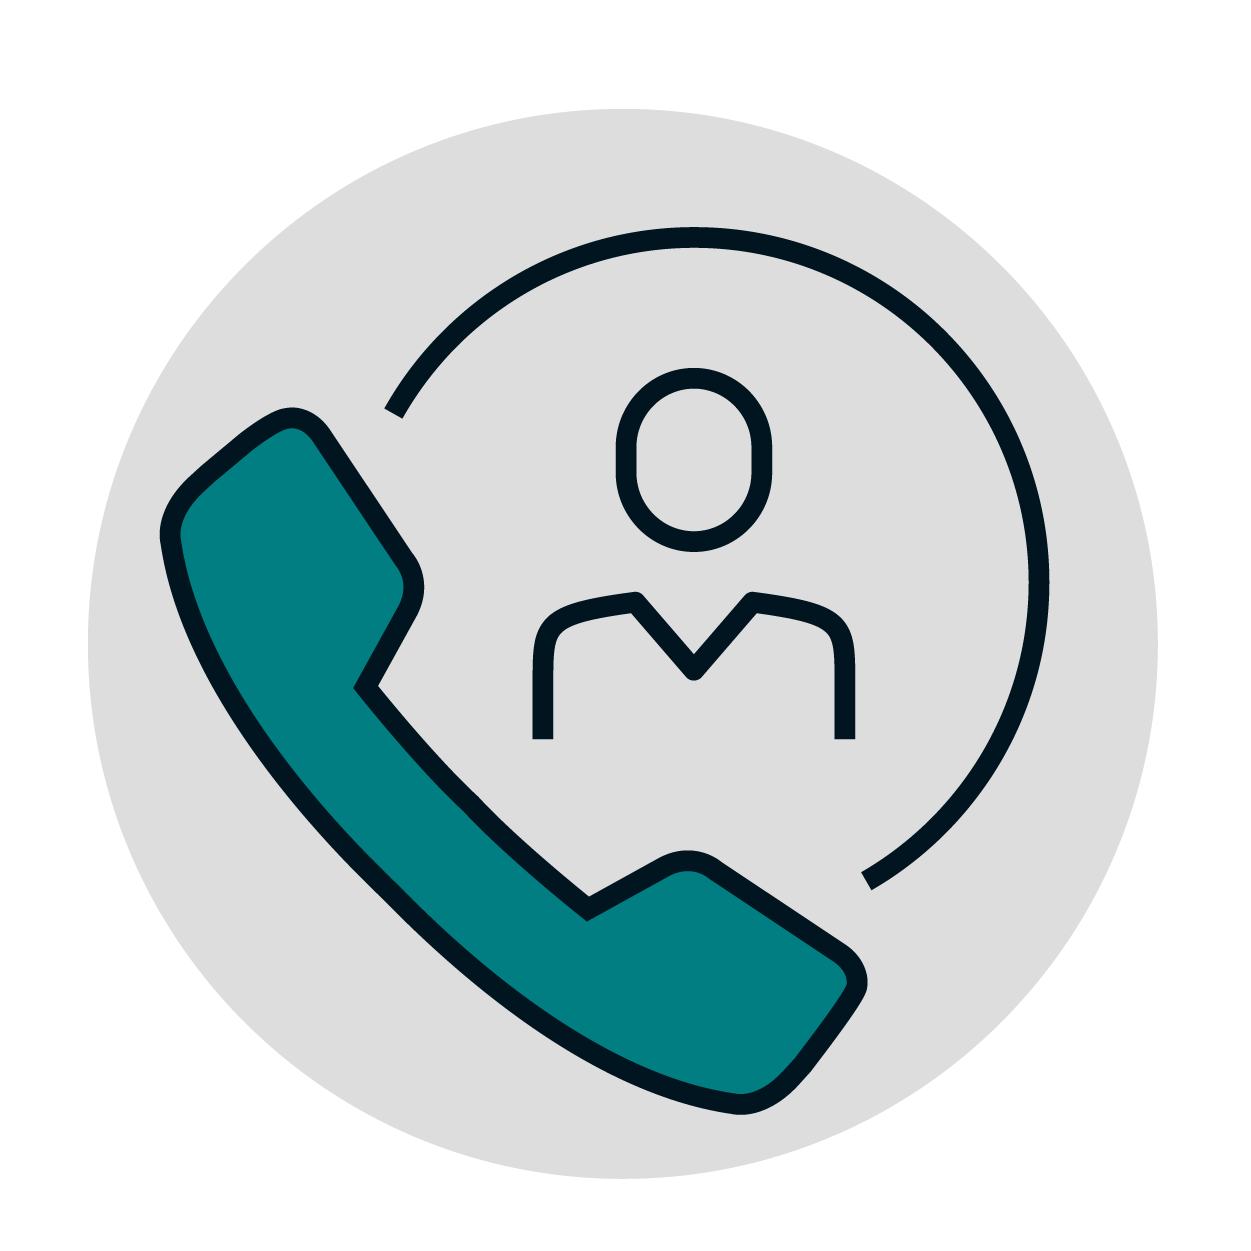 Phone icon to call in to request care